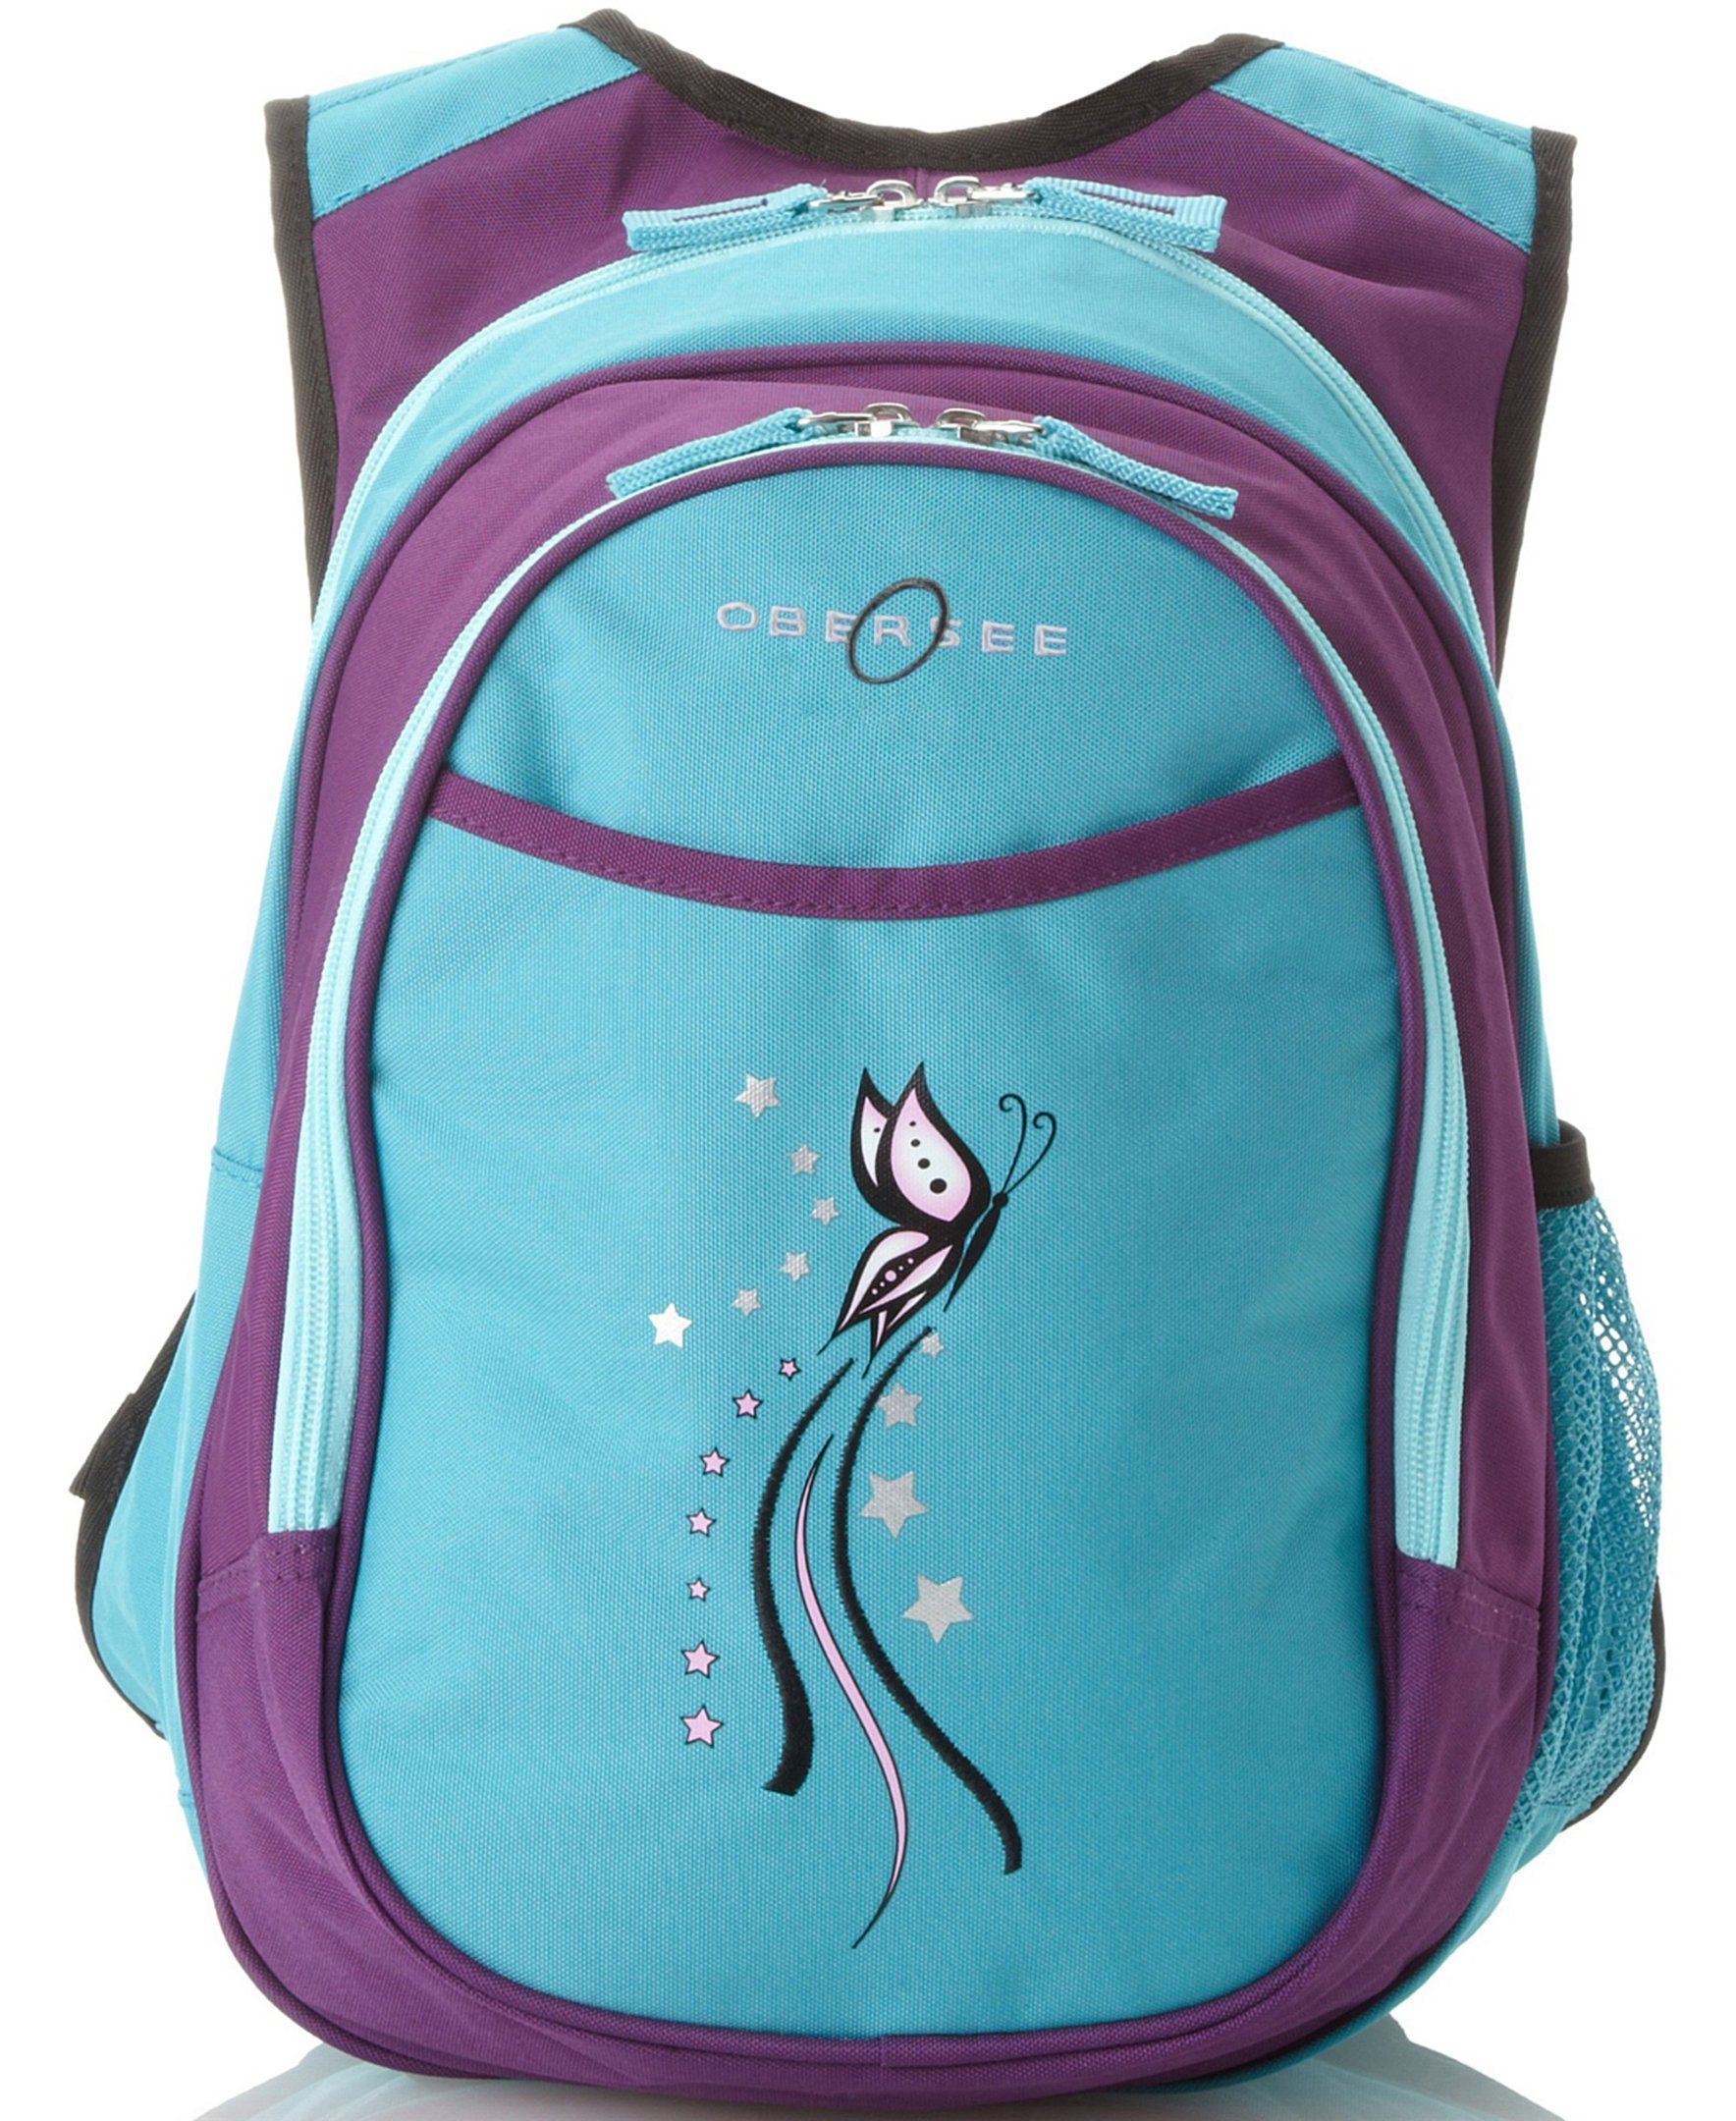 O3KCBP004 Obersee Mini Preschool All-in-One Backpack for Toddlers and Kids with integrated Insulated Cooler | Butterfly - image 1 of 5